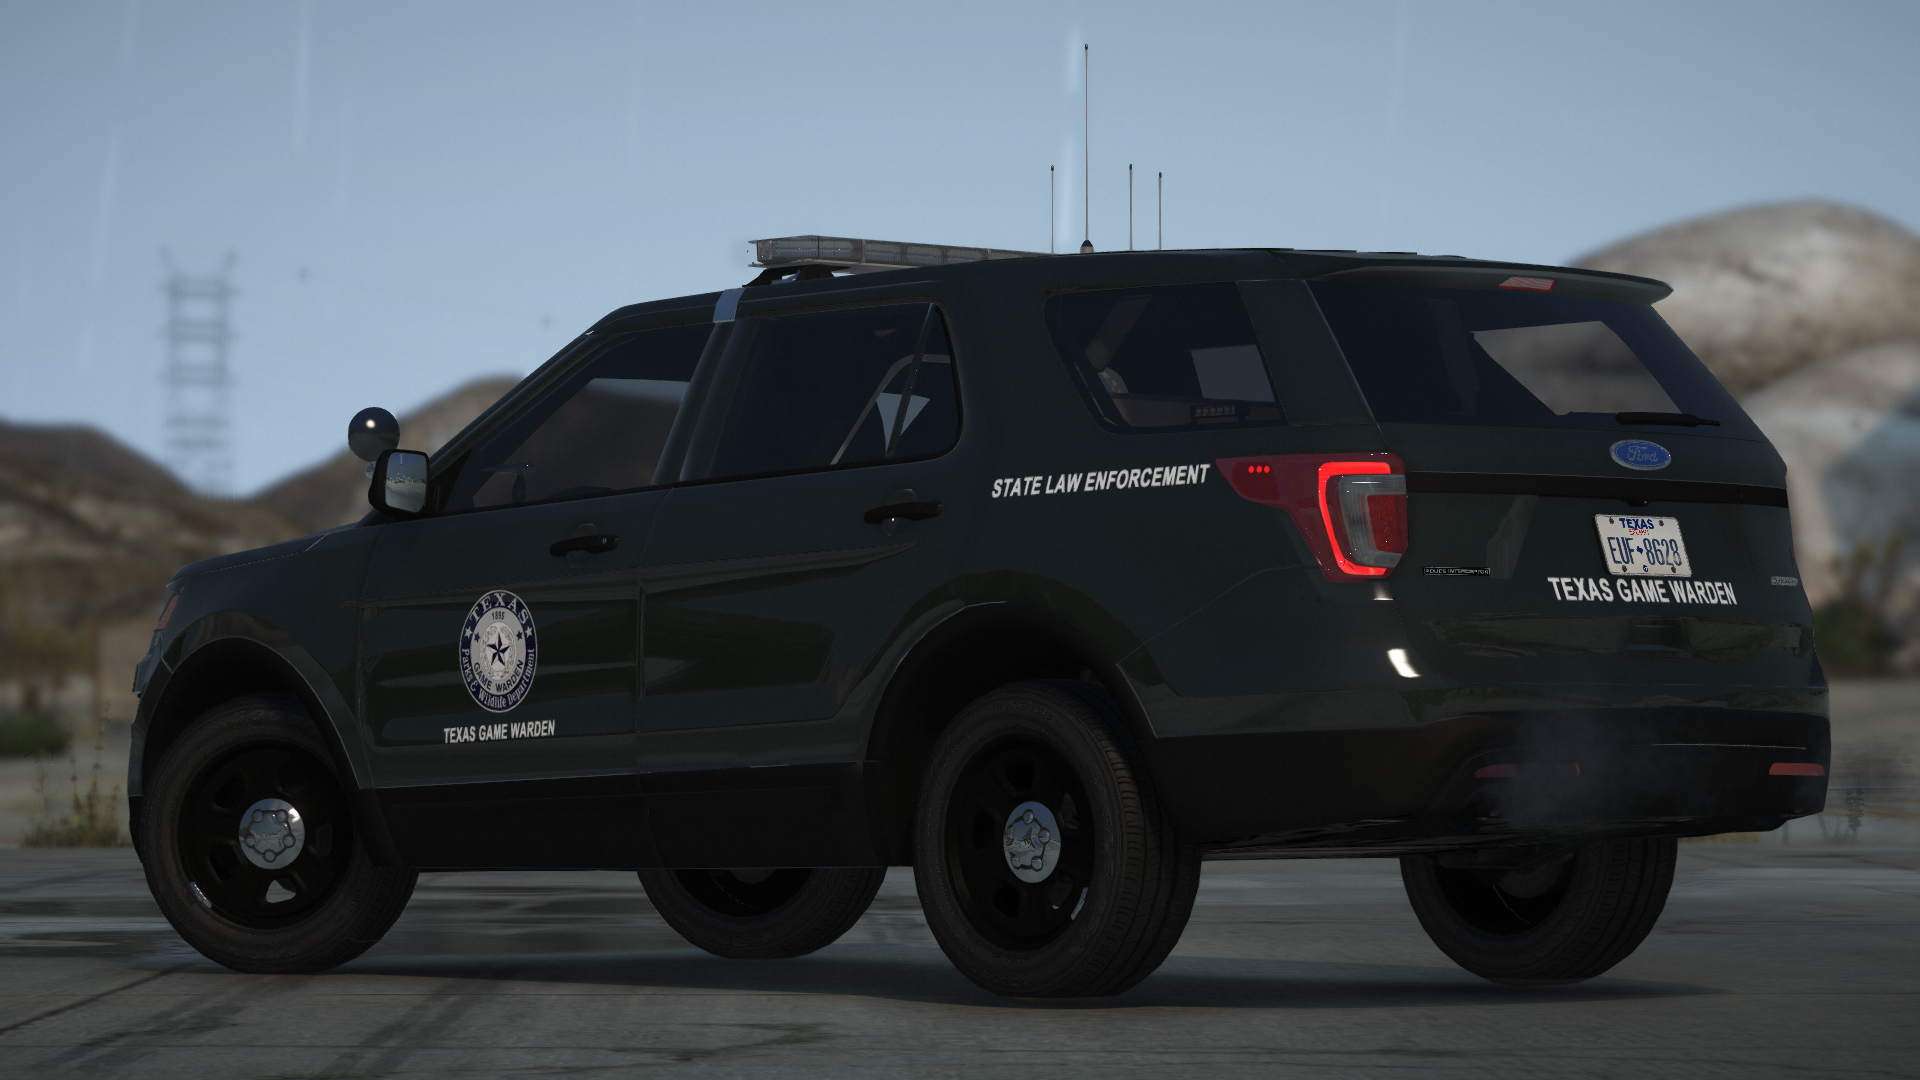 Finally some good looking Game Warden Vehicles to patrol with. : r